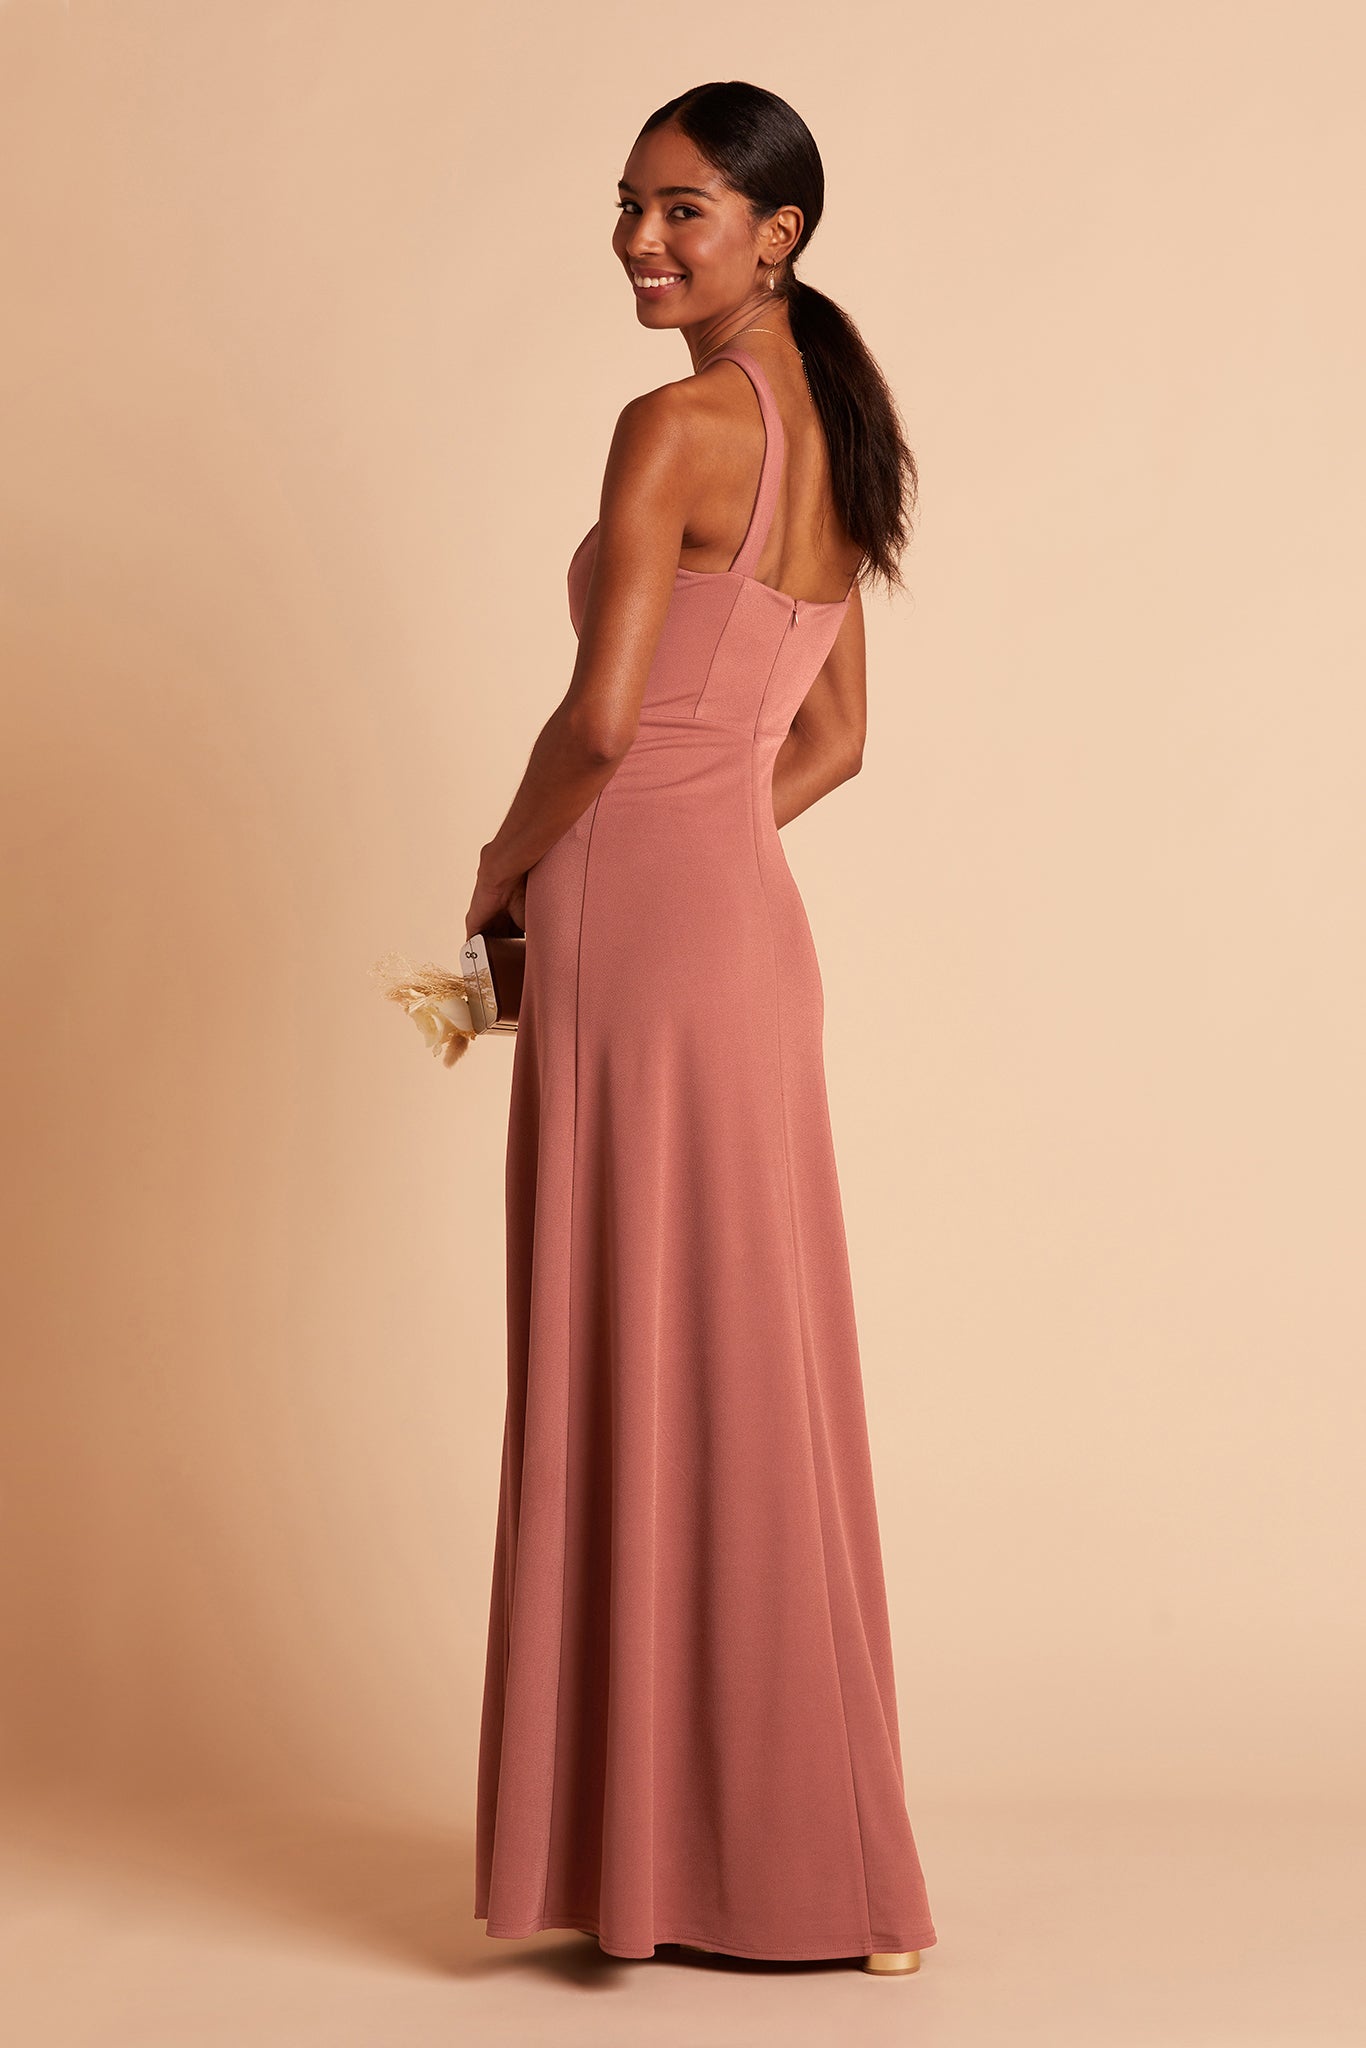 Gene bridesmaid dress with slit in desert rose crepe by Birdy Grey, side view